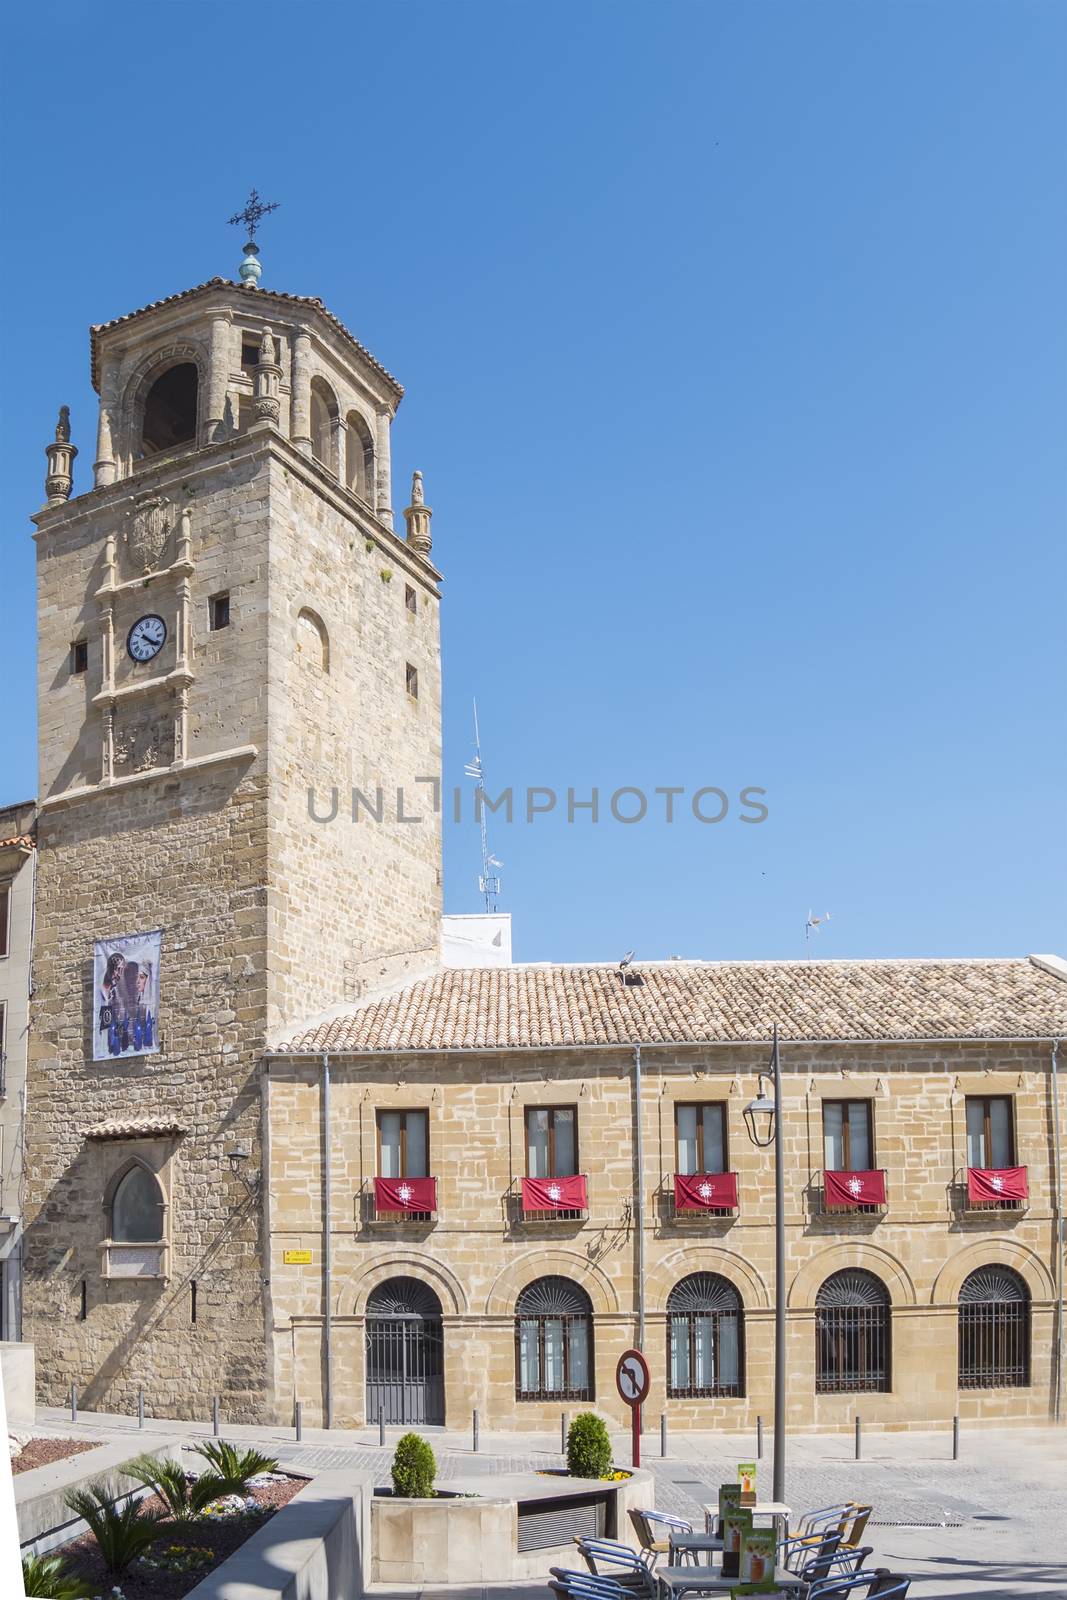 Clock Tower in Andalucia Square, Ubeda, Jaen, Spain by max8xam